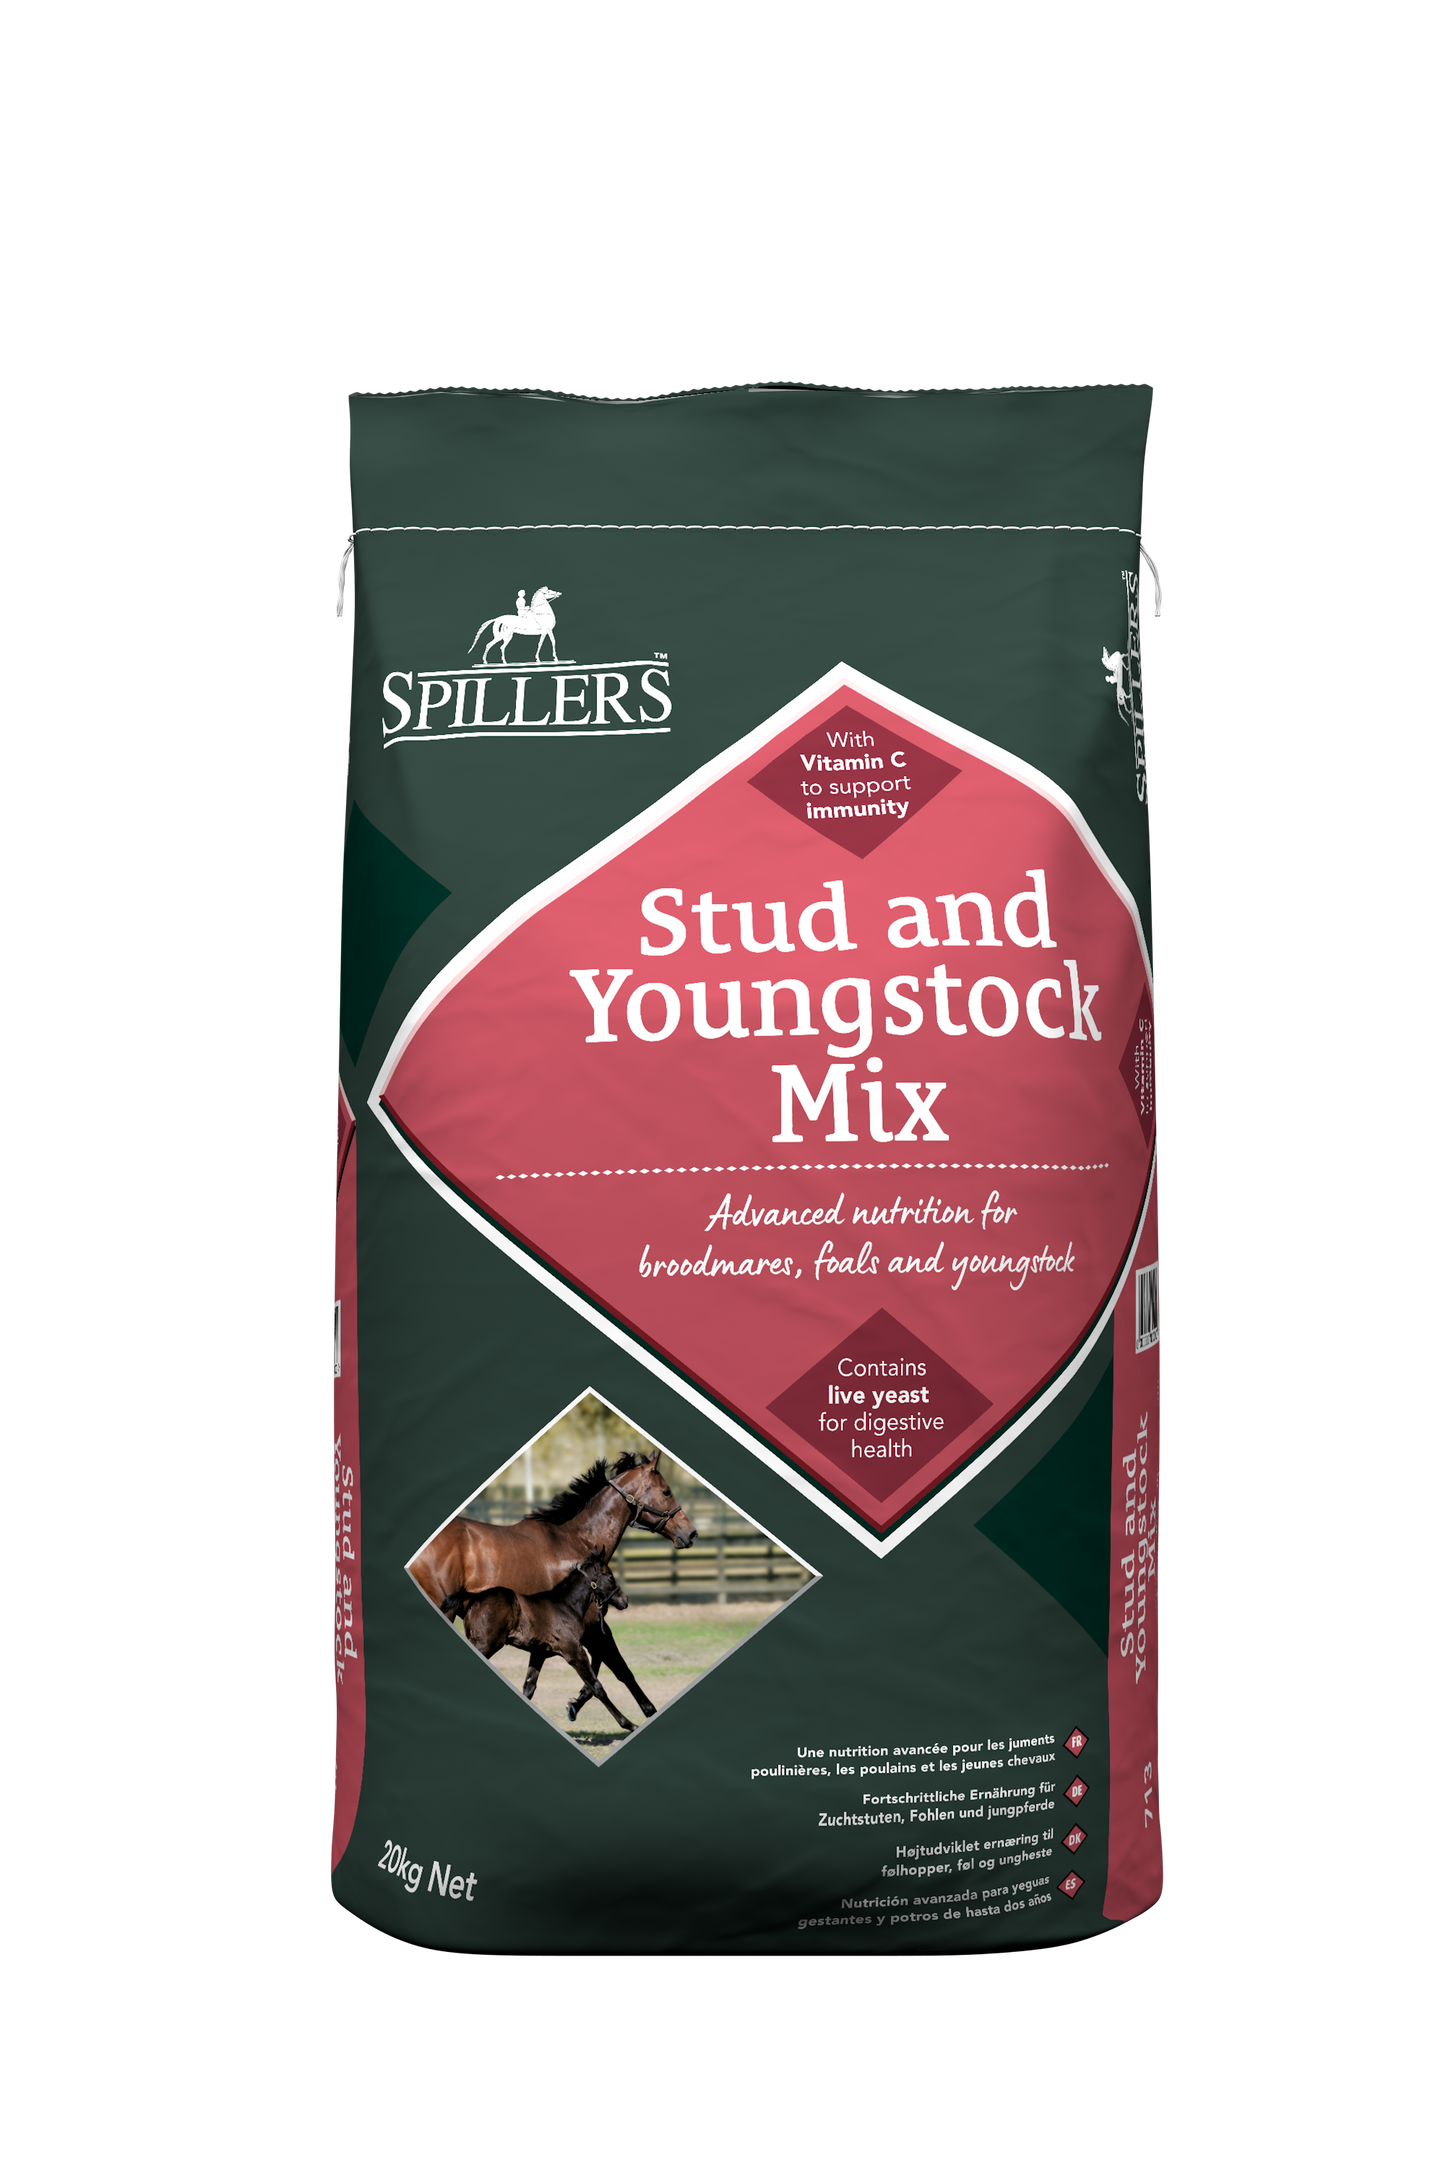 Spillers Stud & Youngstock Mix